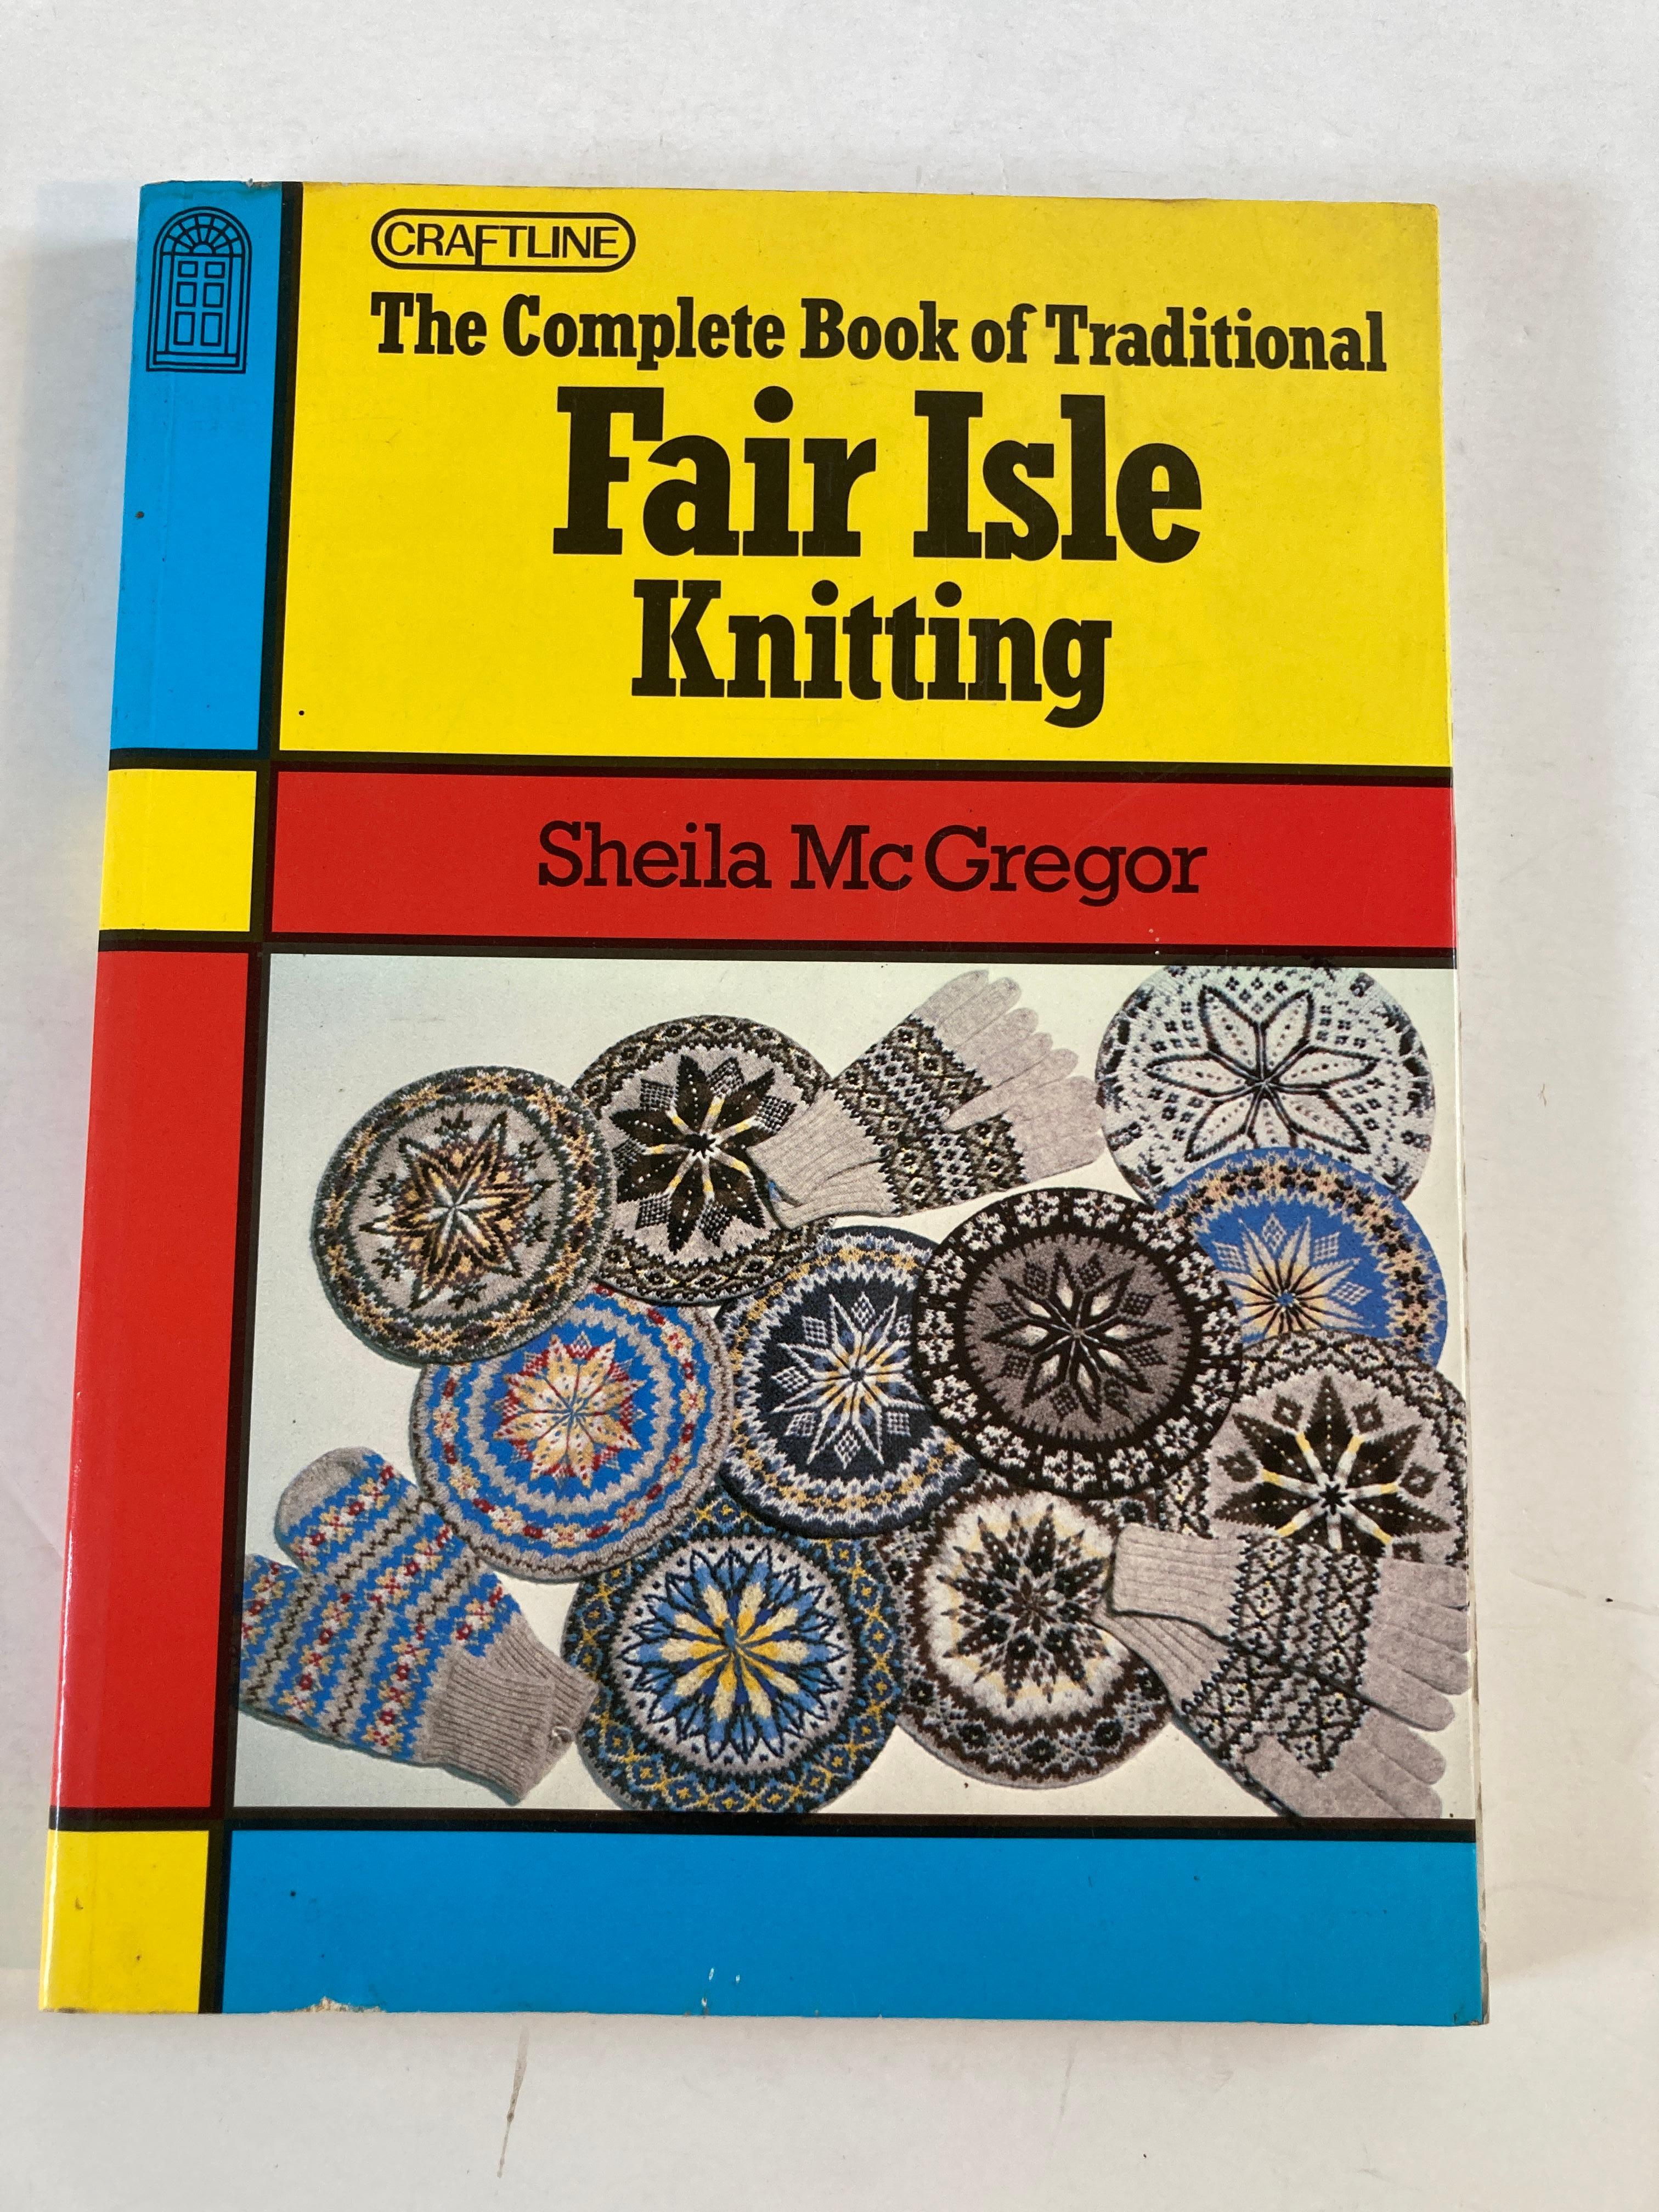 The Complete Book Of Traditional Fair Isle Knitting by McGregor, Sheila.
1st Edition Published 1982
Title The Complete Book of Traditional Fair Isle Knitting
Author McGregor, Sheila
First Printing; Hardcover
Book Condition Used Good+ dust